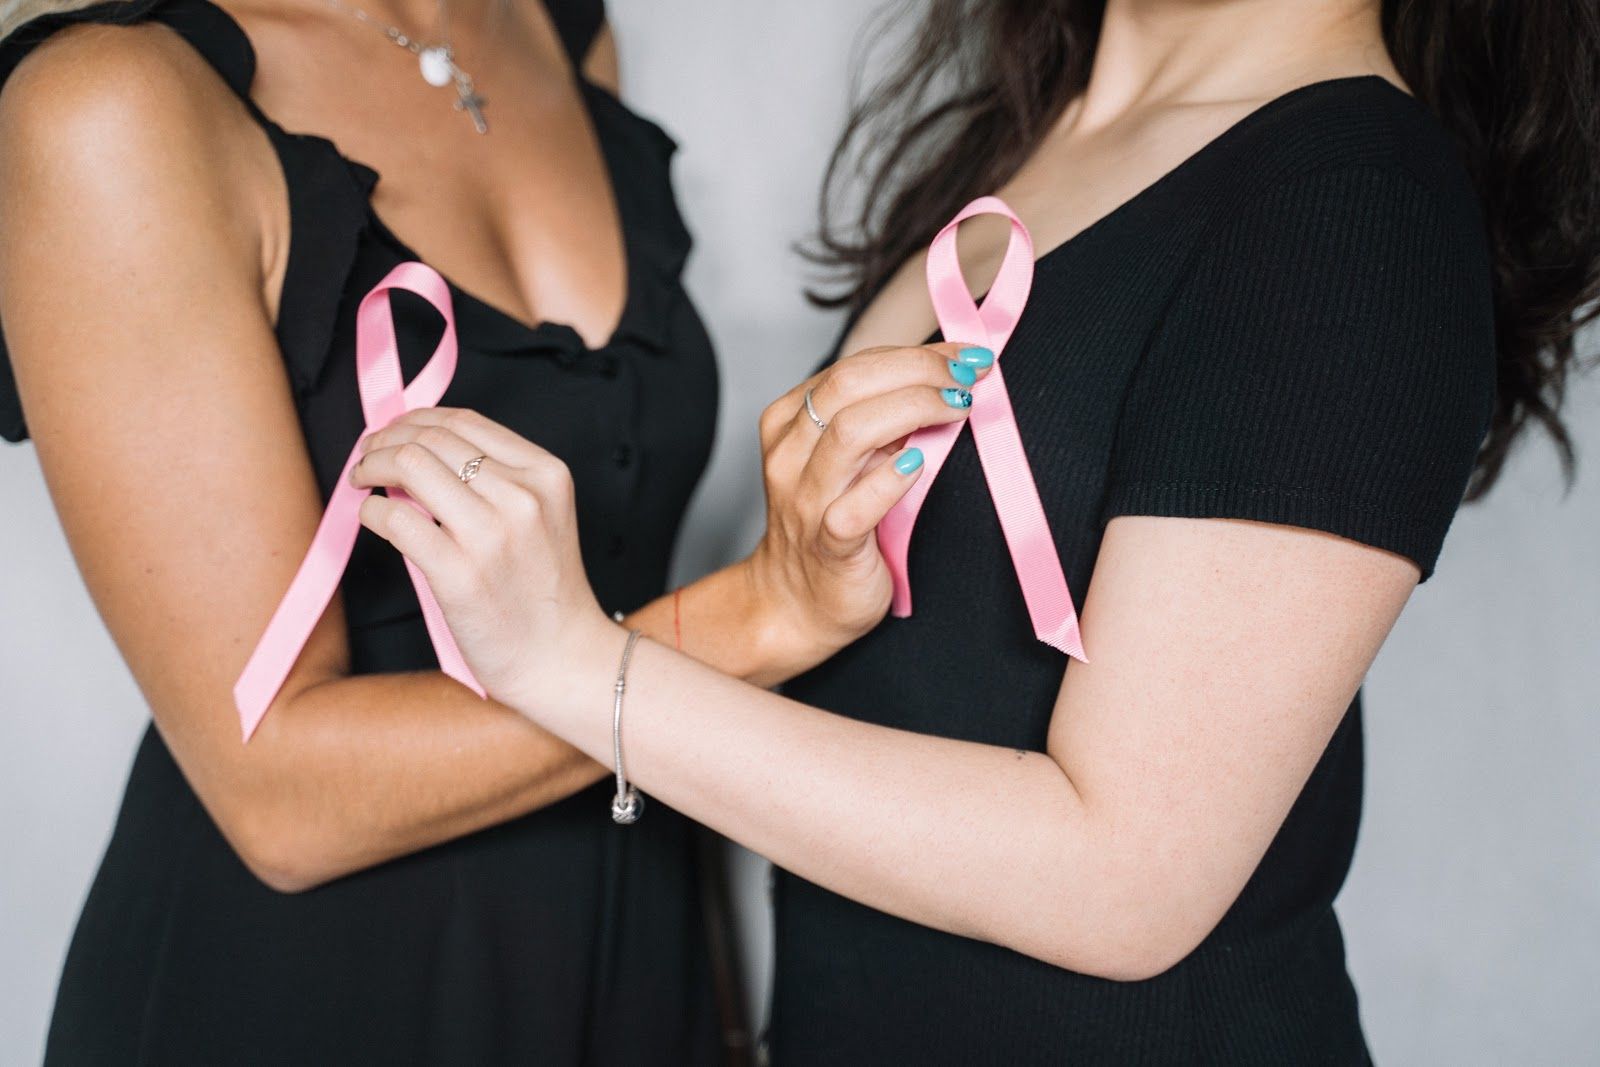 Myths about breast cancer